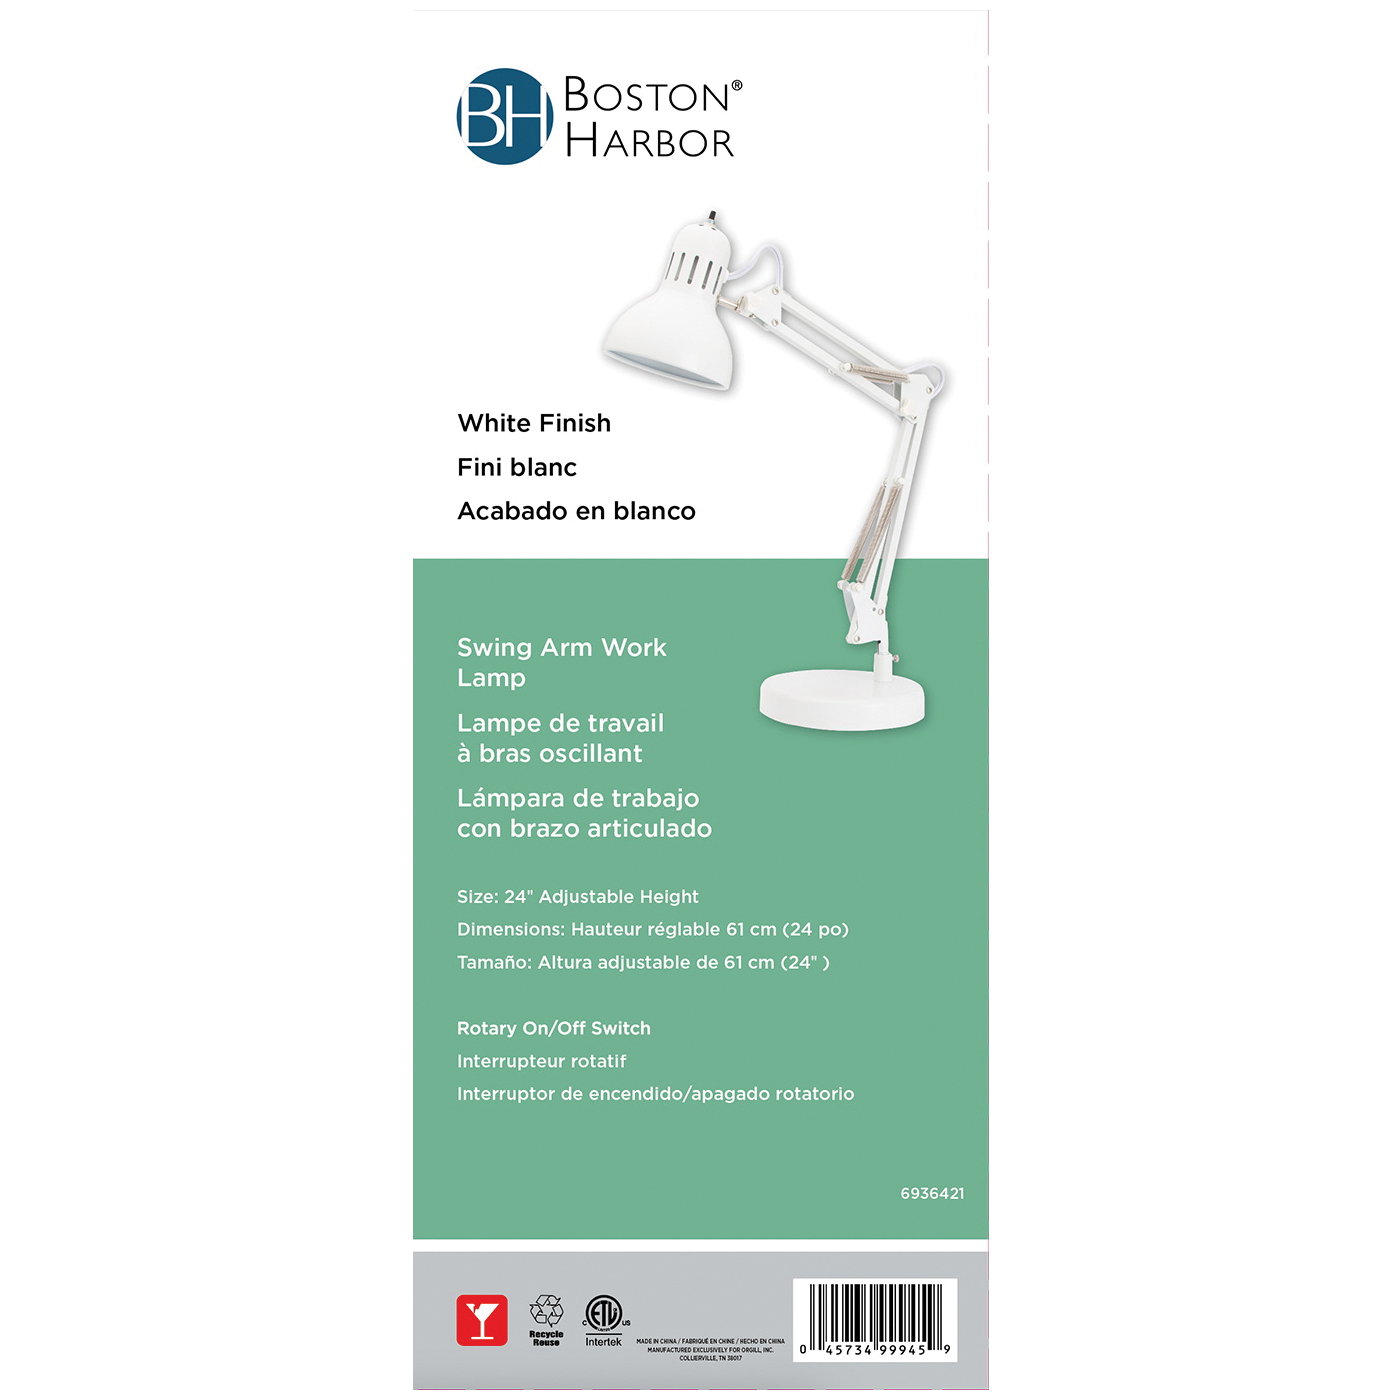 Boston Harbor TL-WK-134E-WH-3L Swing Arm Work Lamp, 120 V, 60 W, 1-Lamp, A19 or CFL Lamp, White - 3